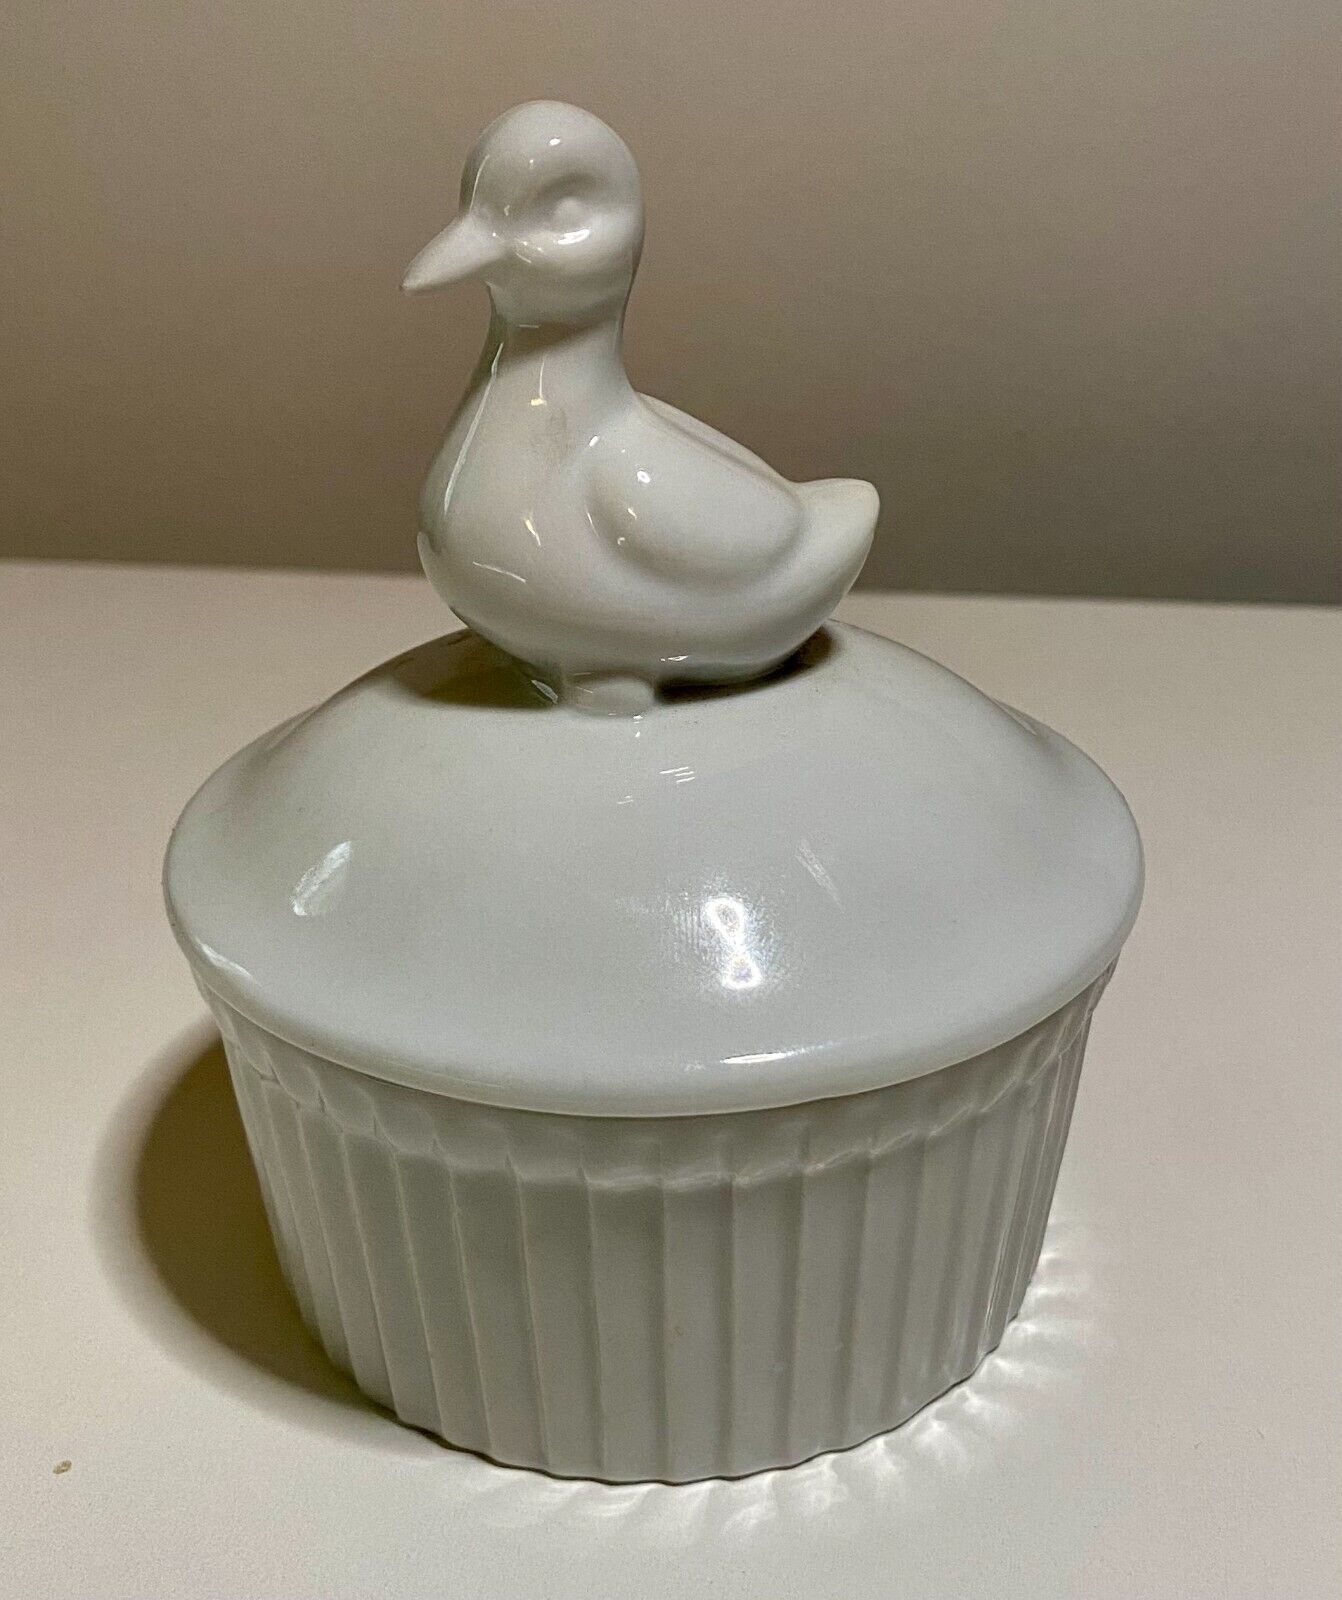 WCL Vintage Duck Trinket Box. White Glazed Ceramic Pottery. Collectable.